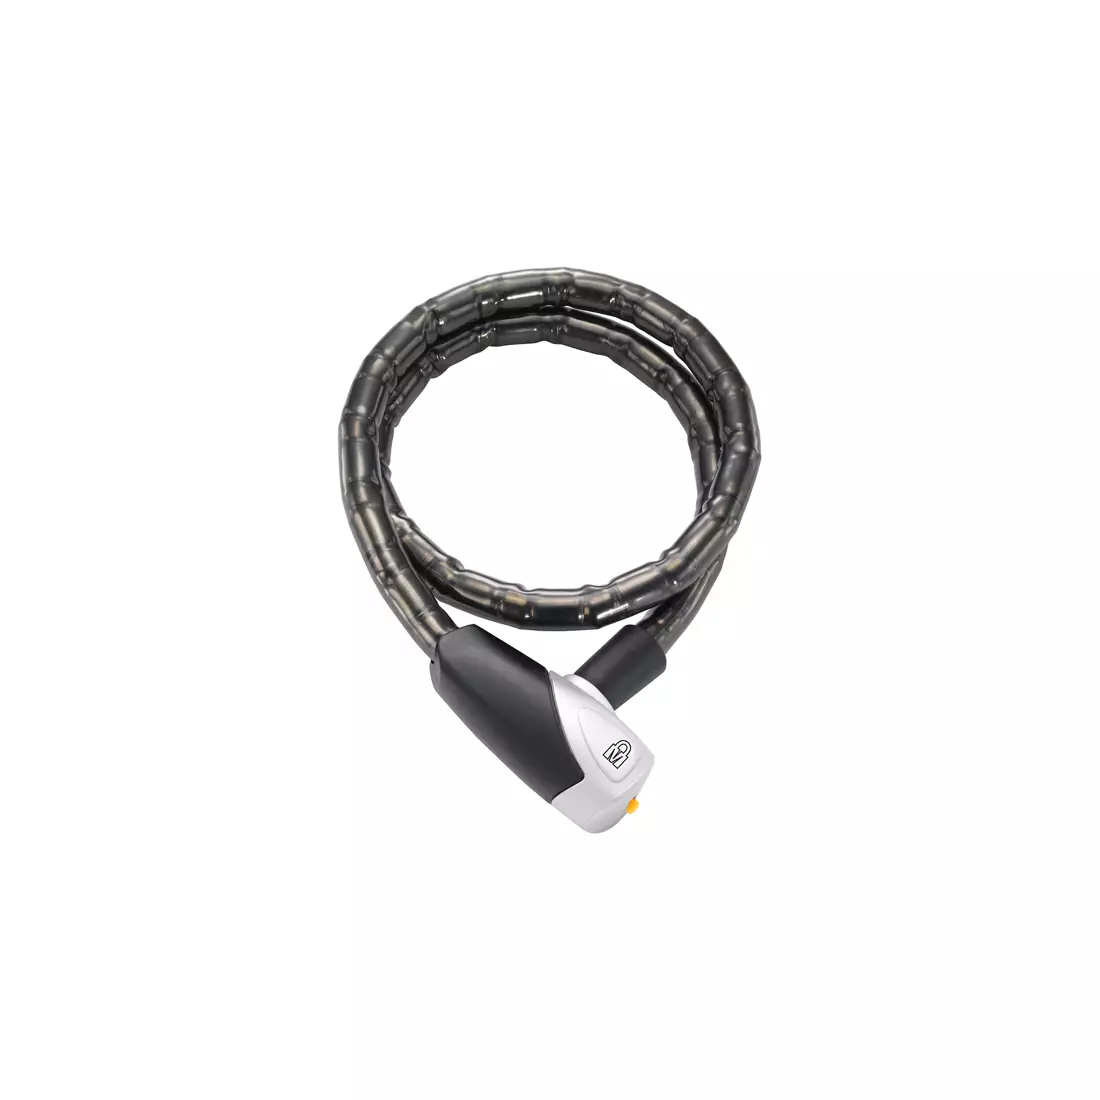 MAGNUM bicycle lock cord 100cm 5 keys with a code black MGN-3014